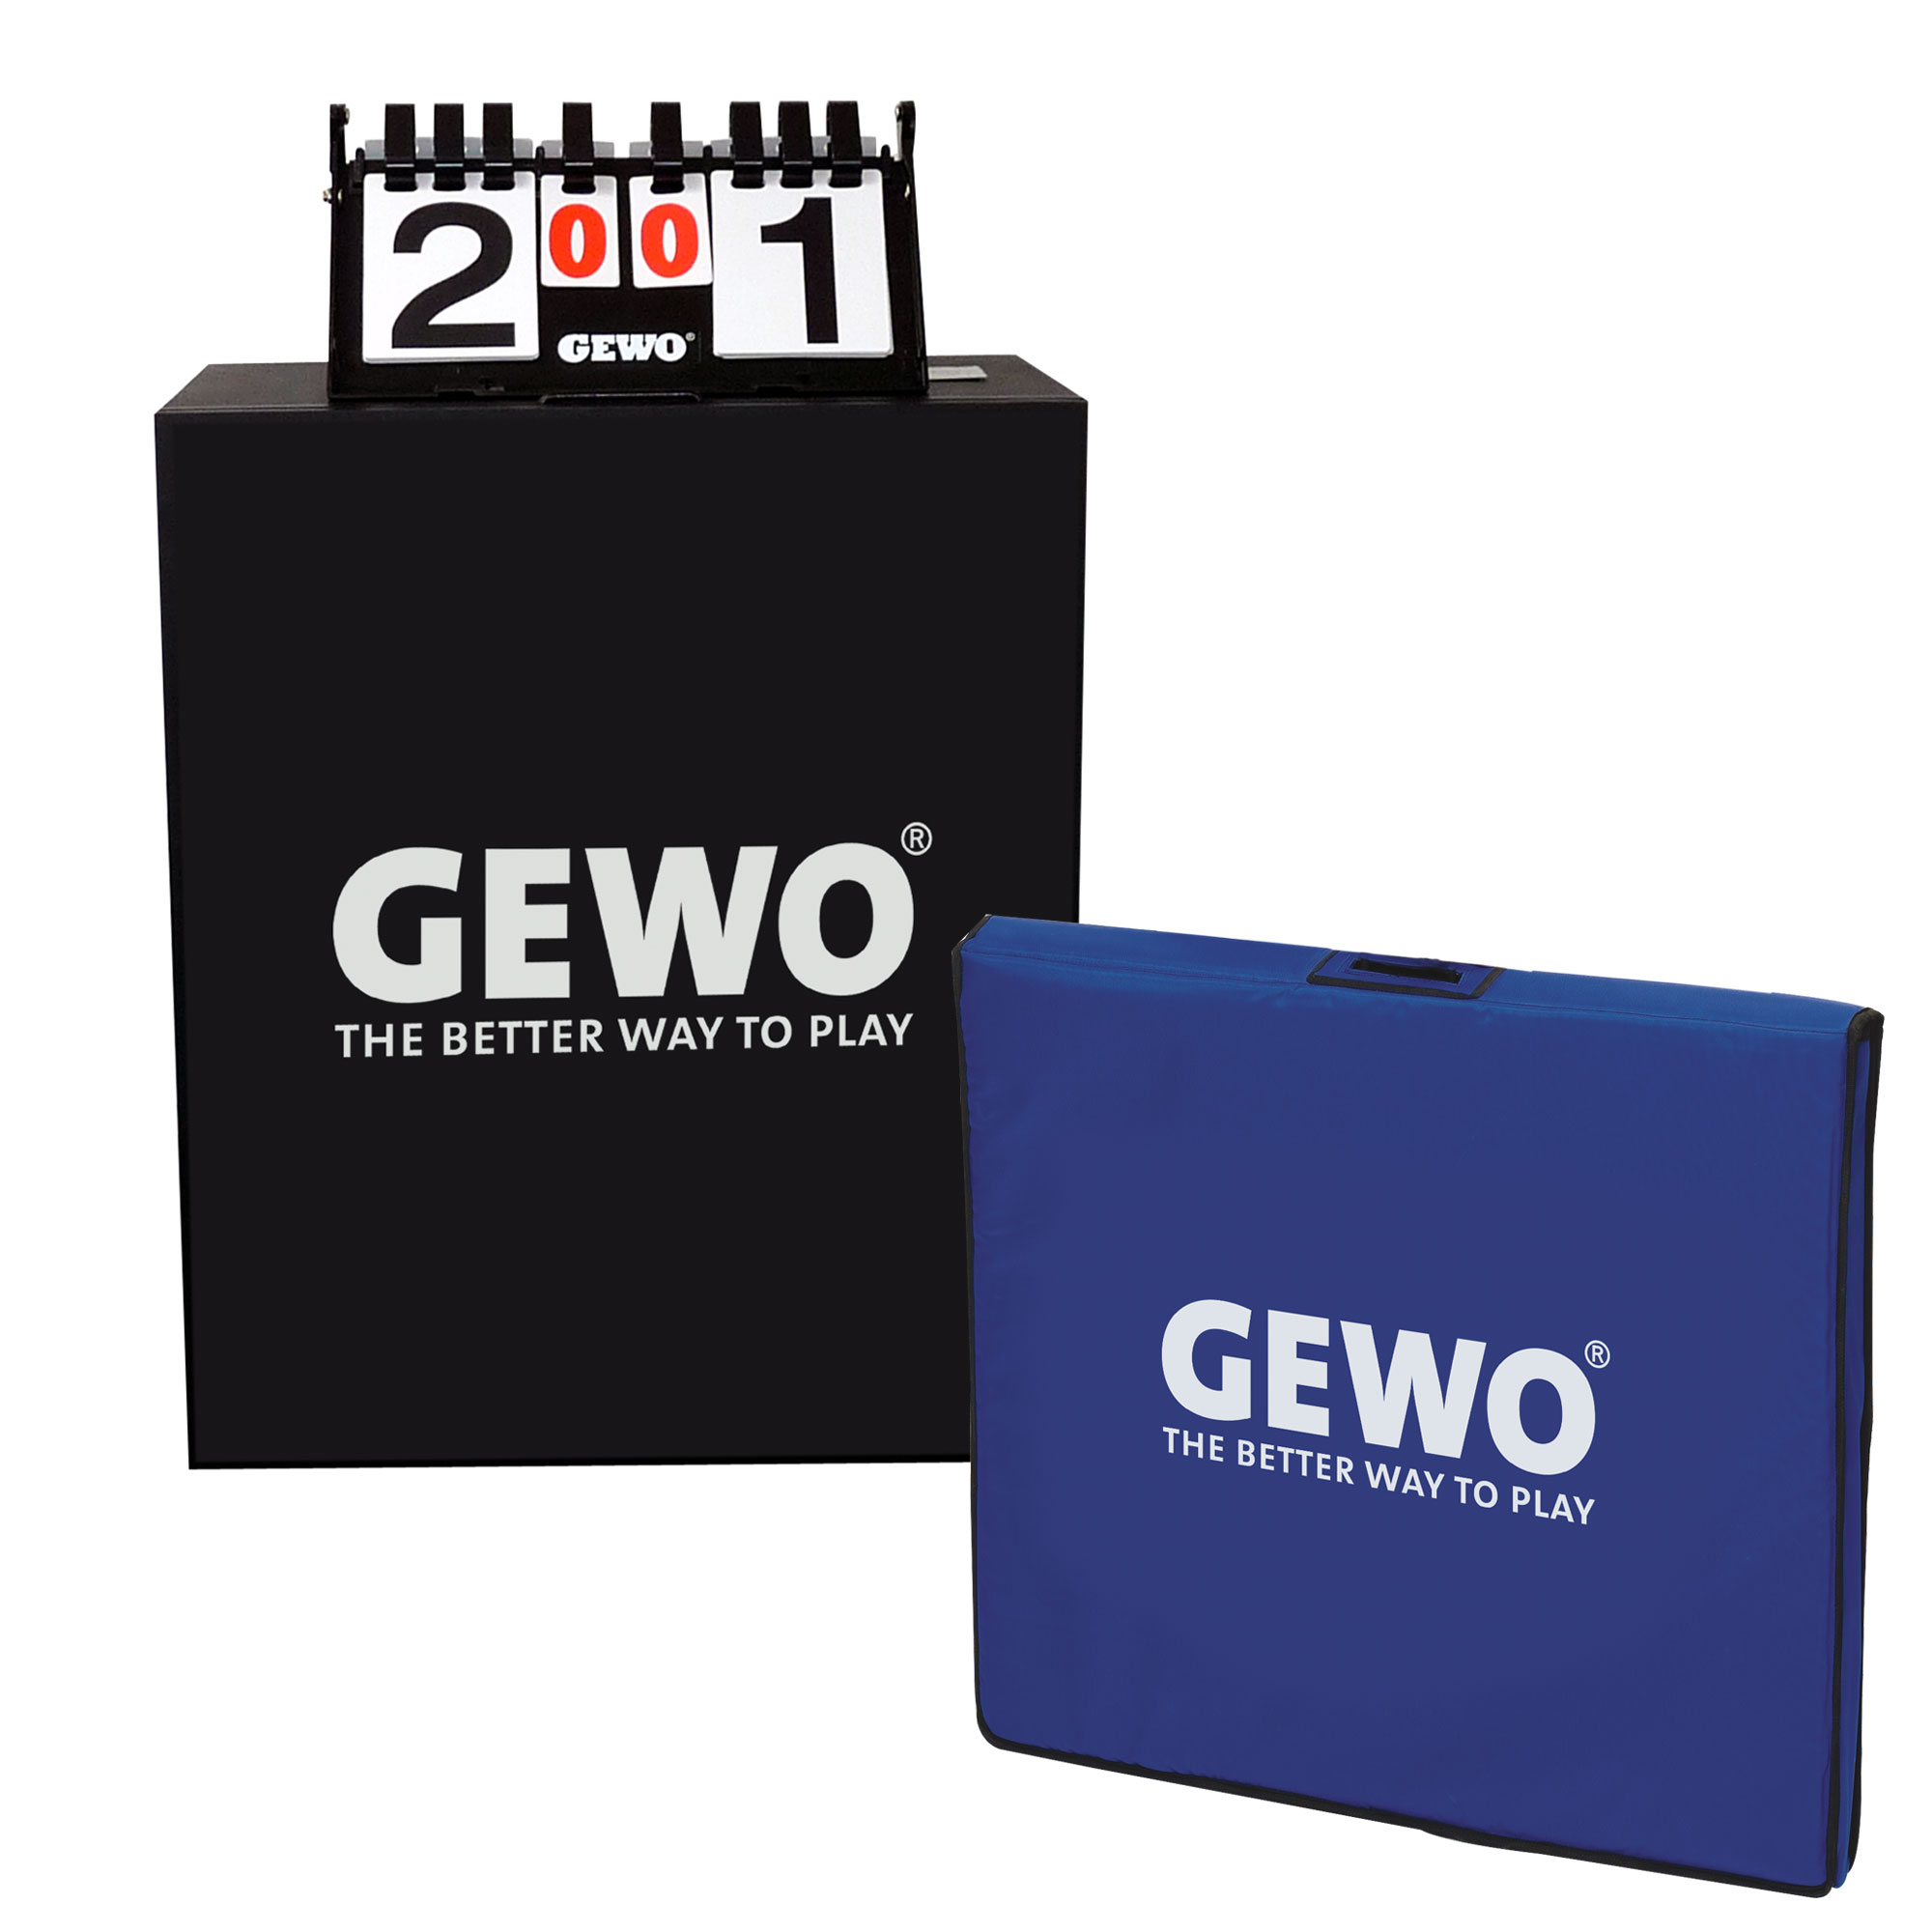 GEWO Referee Table incl.protection covering